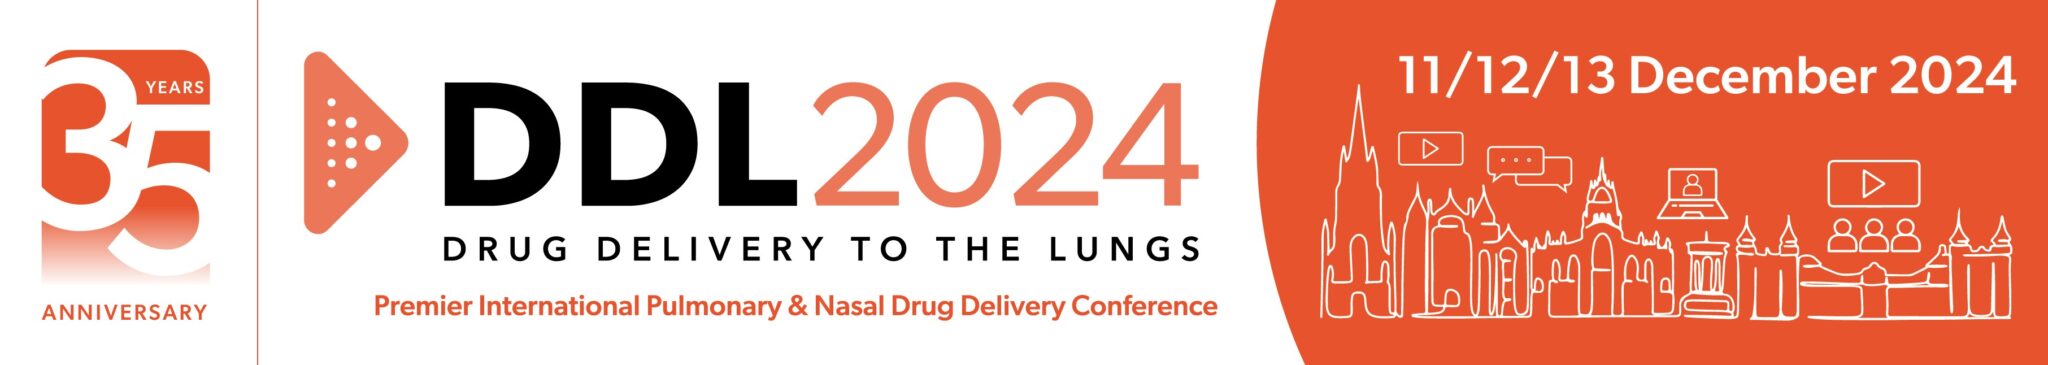 Profile: DDL Drug Delivery to the Lungs Conference